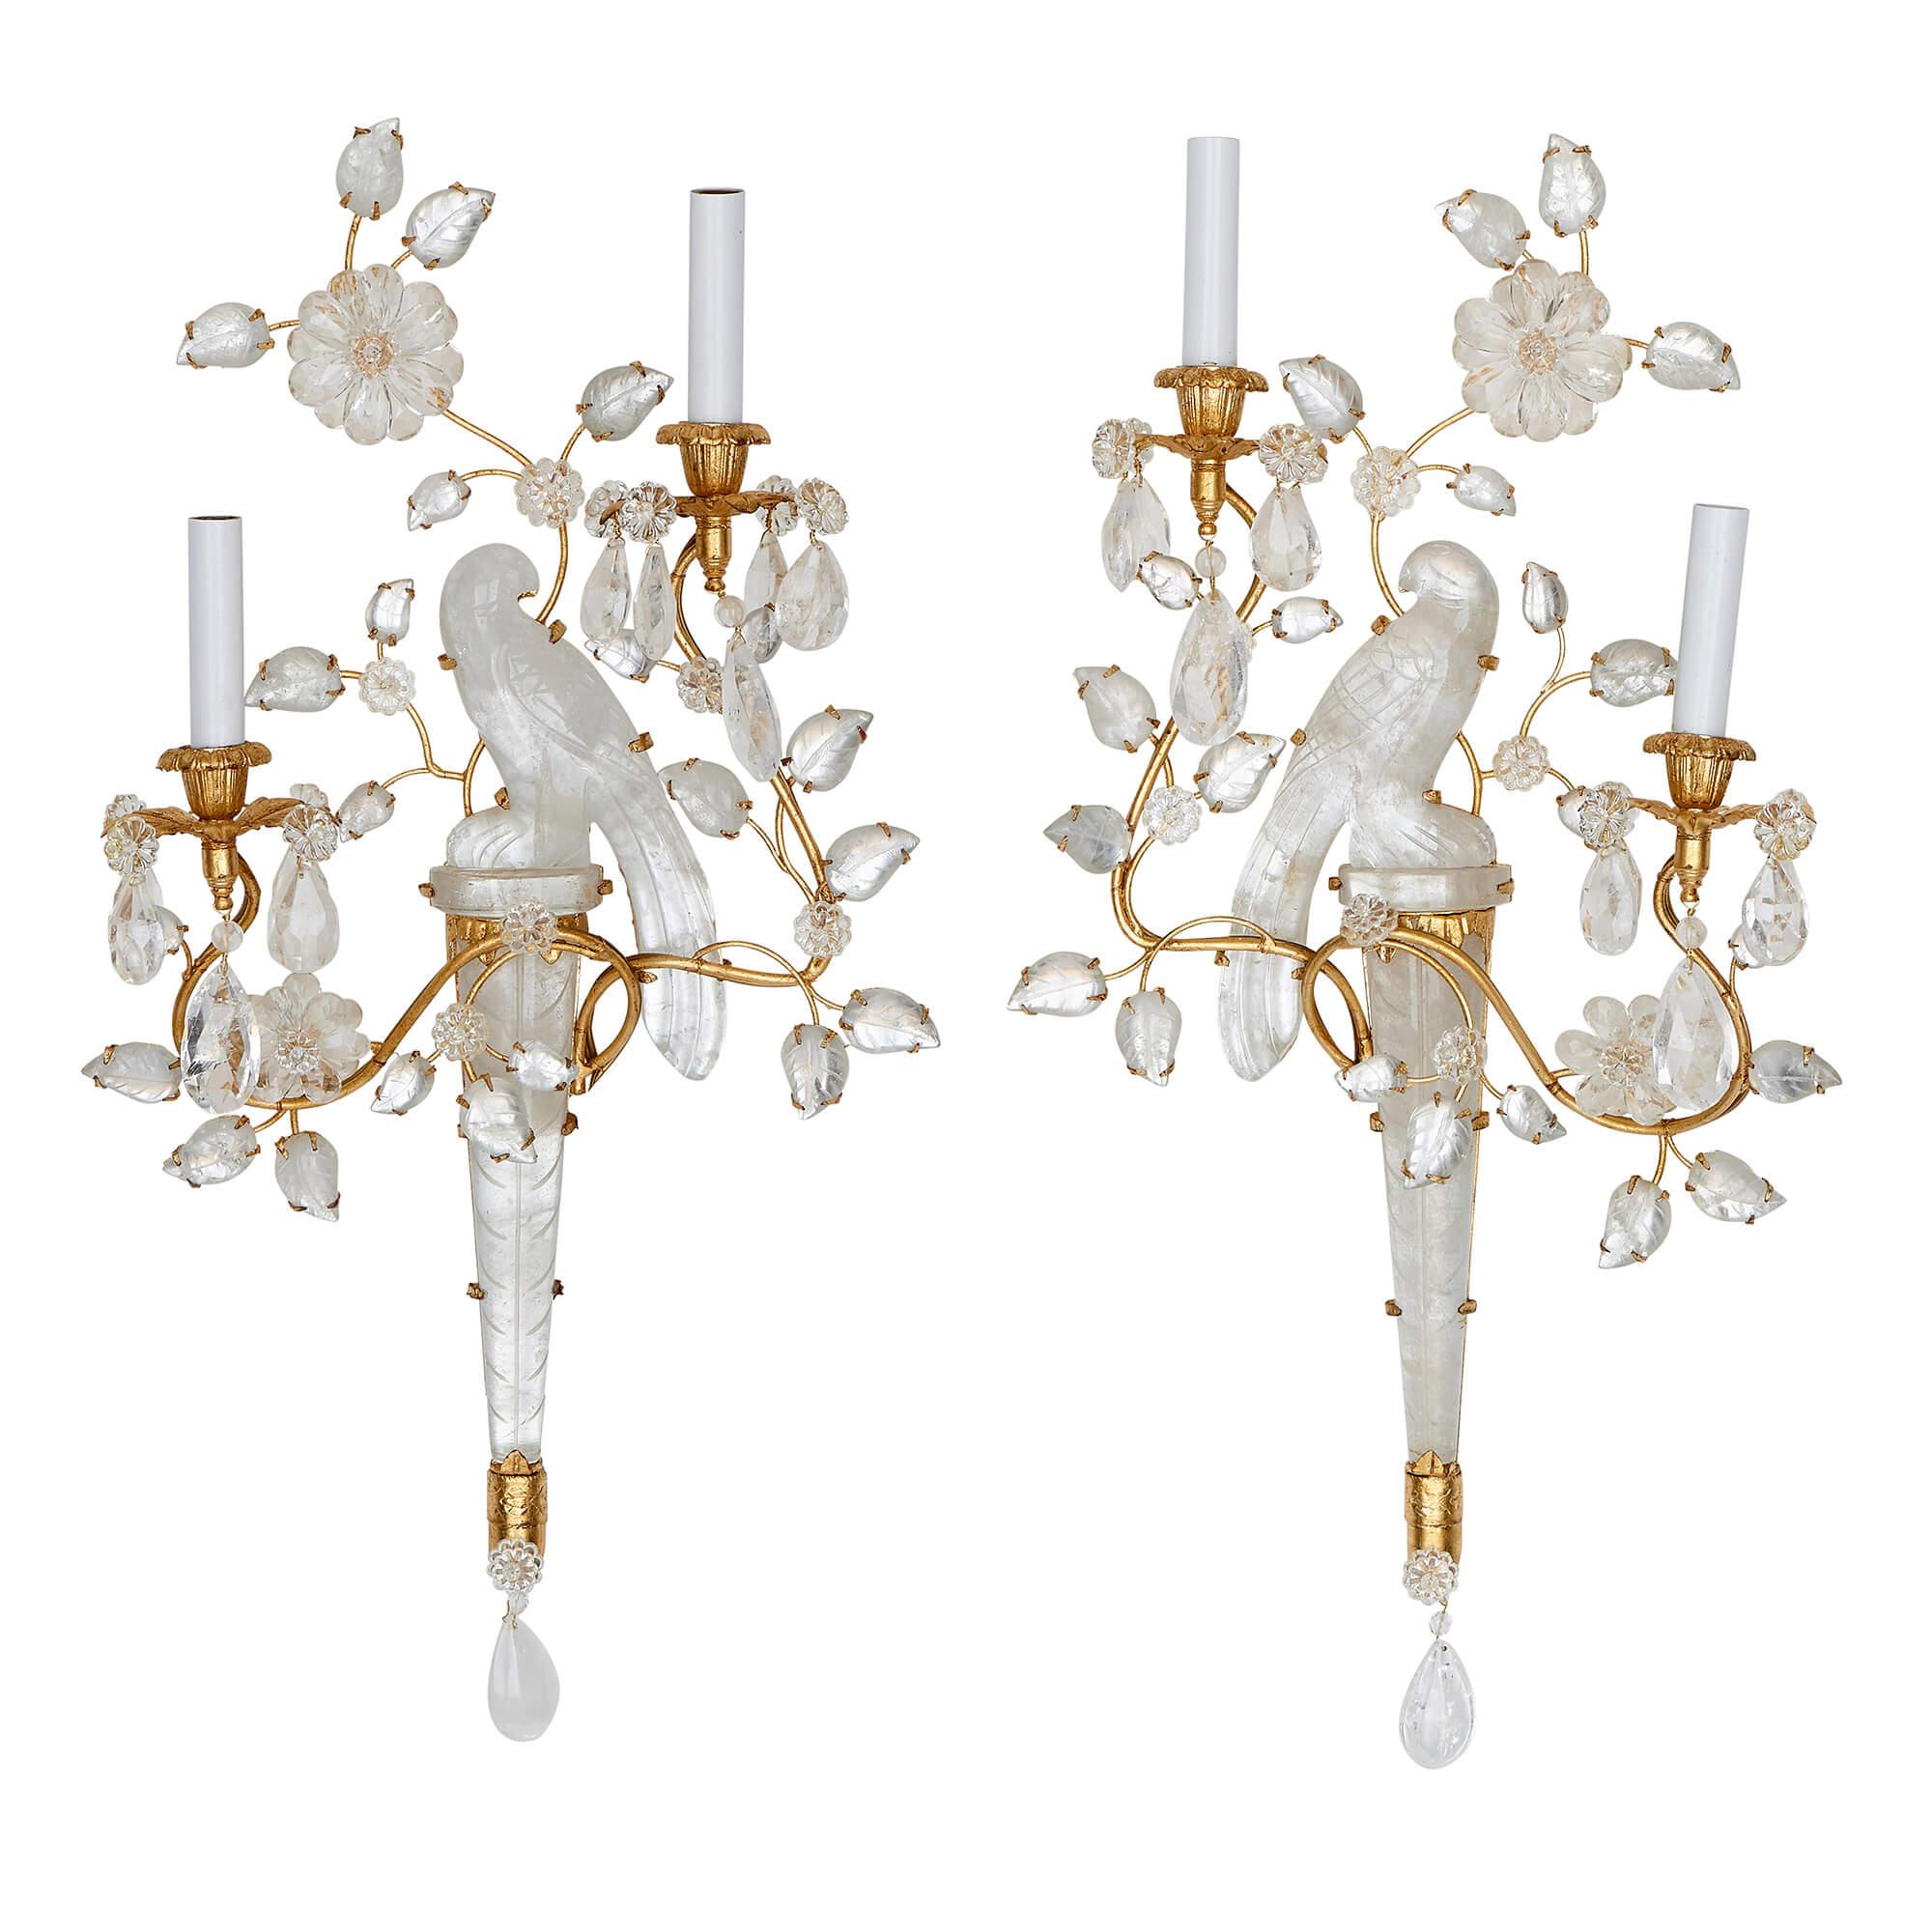 This set of four wall sconces have been crafted in the fashionable Maison Bagues style. They are distinctive for their elegant bird and flower forms that have been crafted from molded glass and rock crystal. 

Founded by Noel Bagues in 1860, the